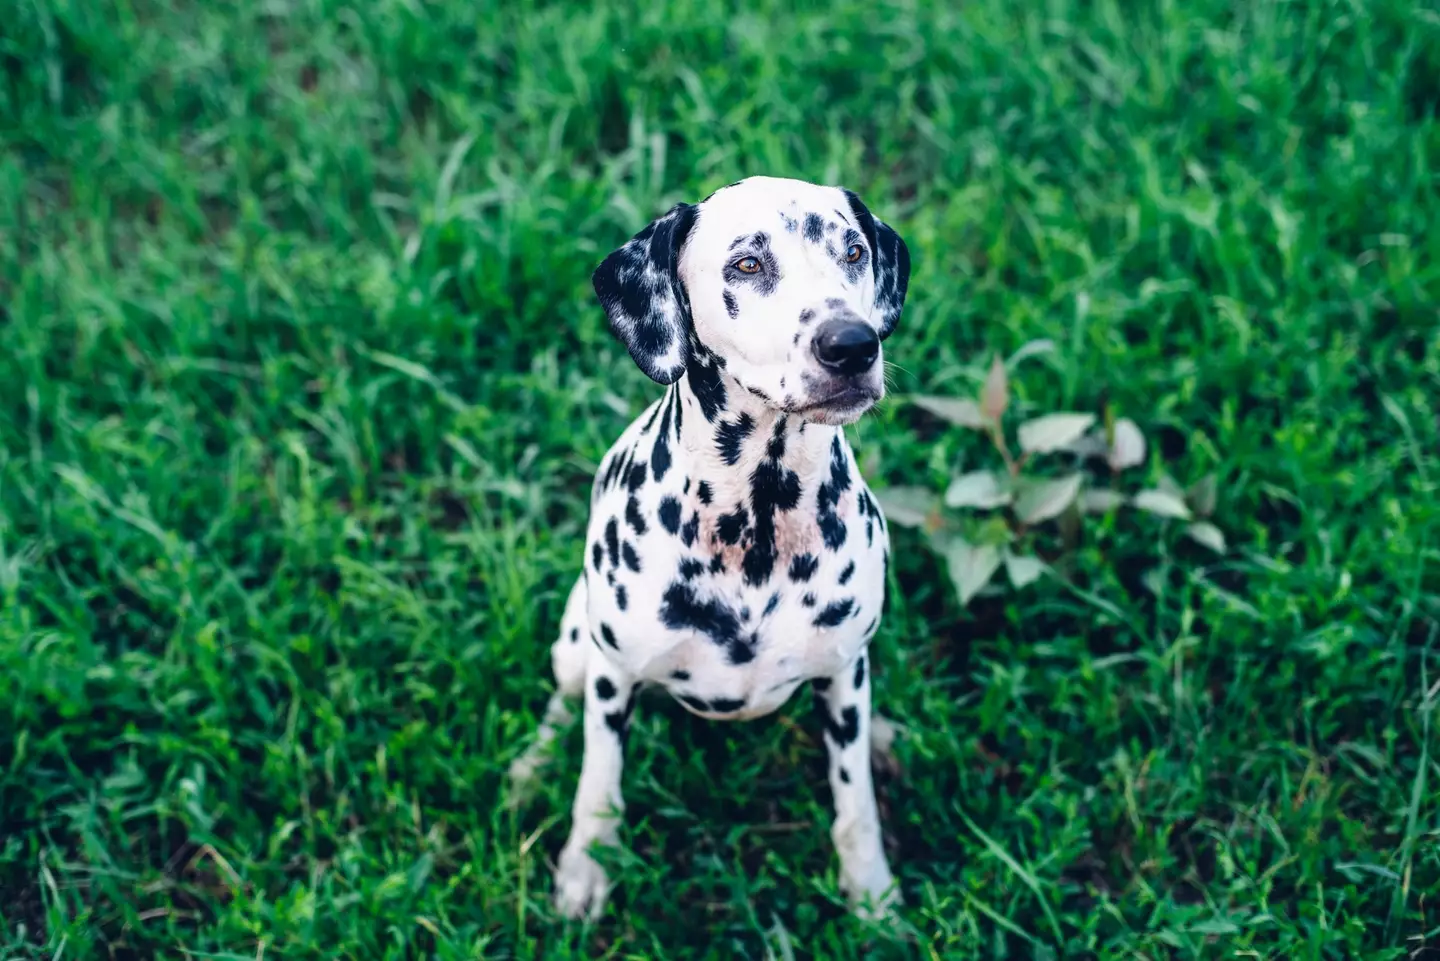 You probably wouldn't expect it of them, but Dalmatians have surprisingly high bite rates.